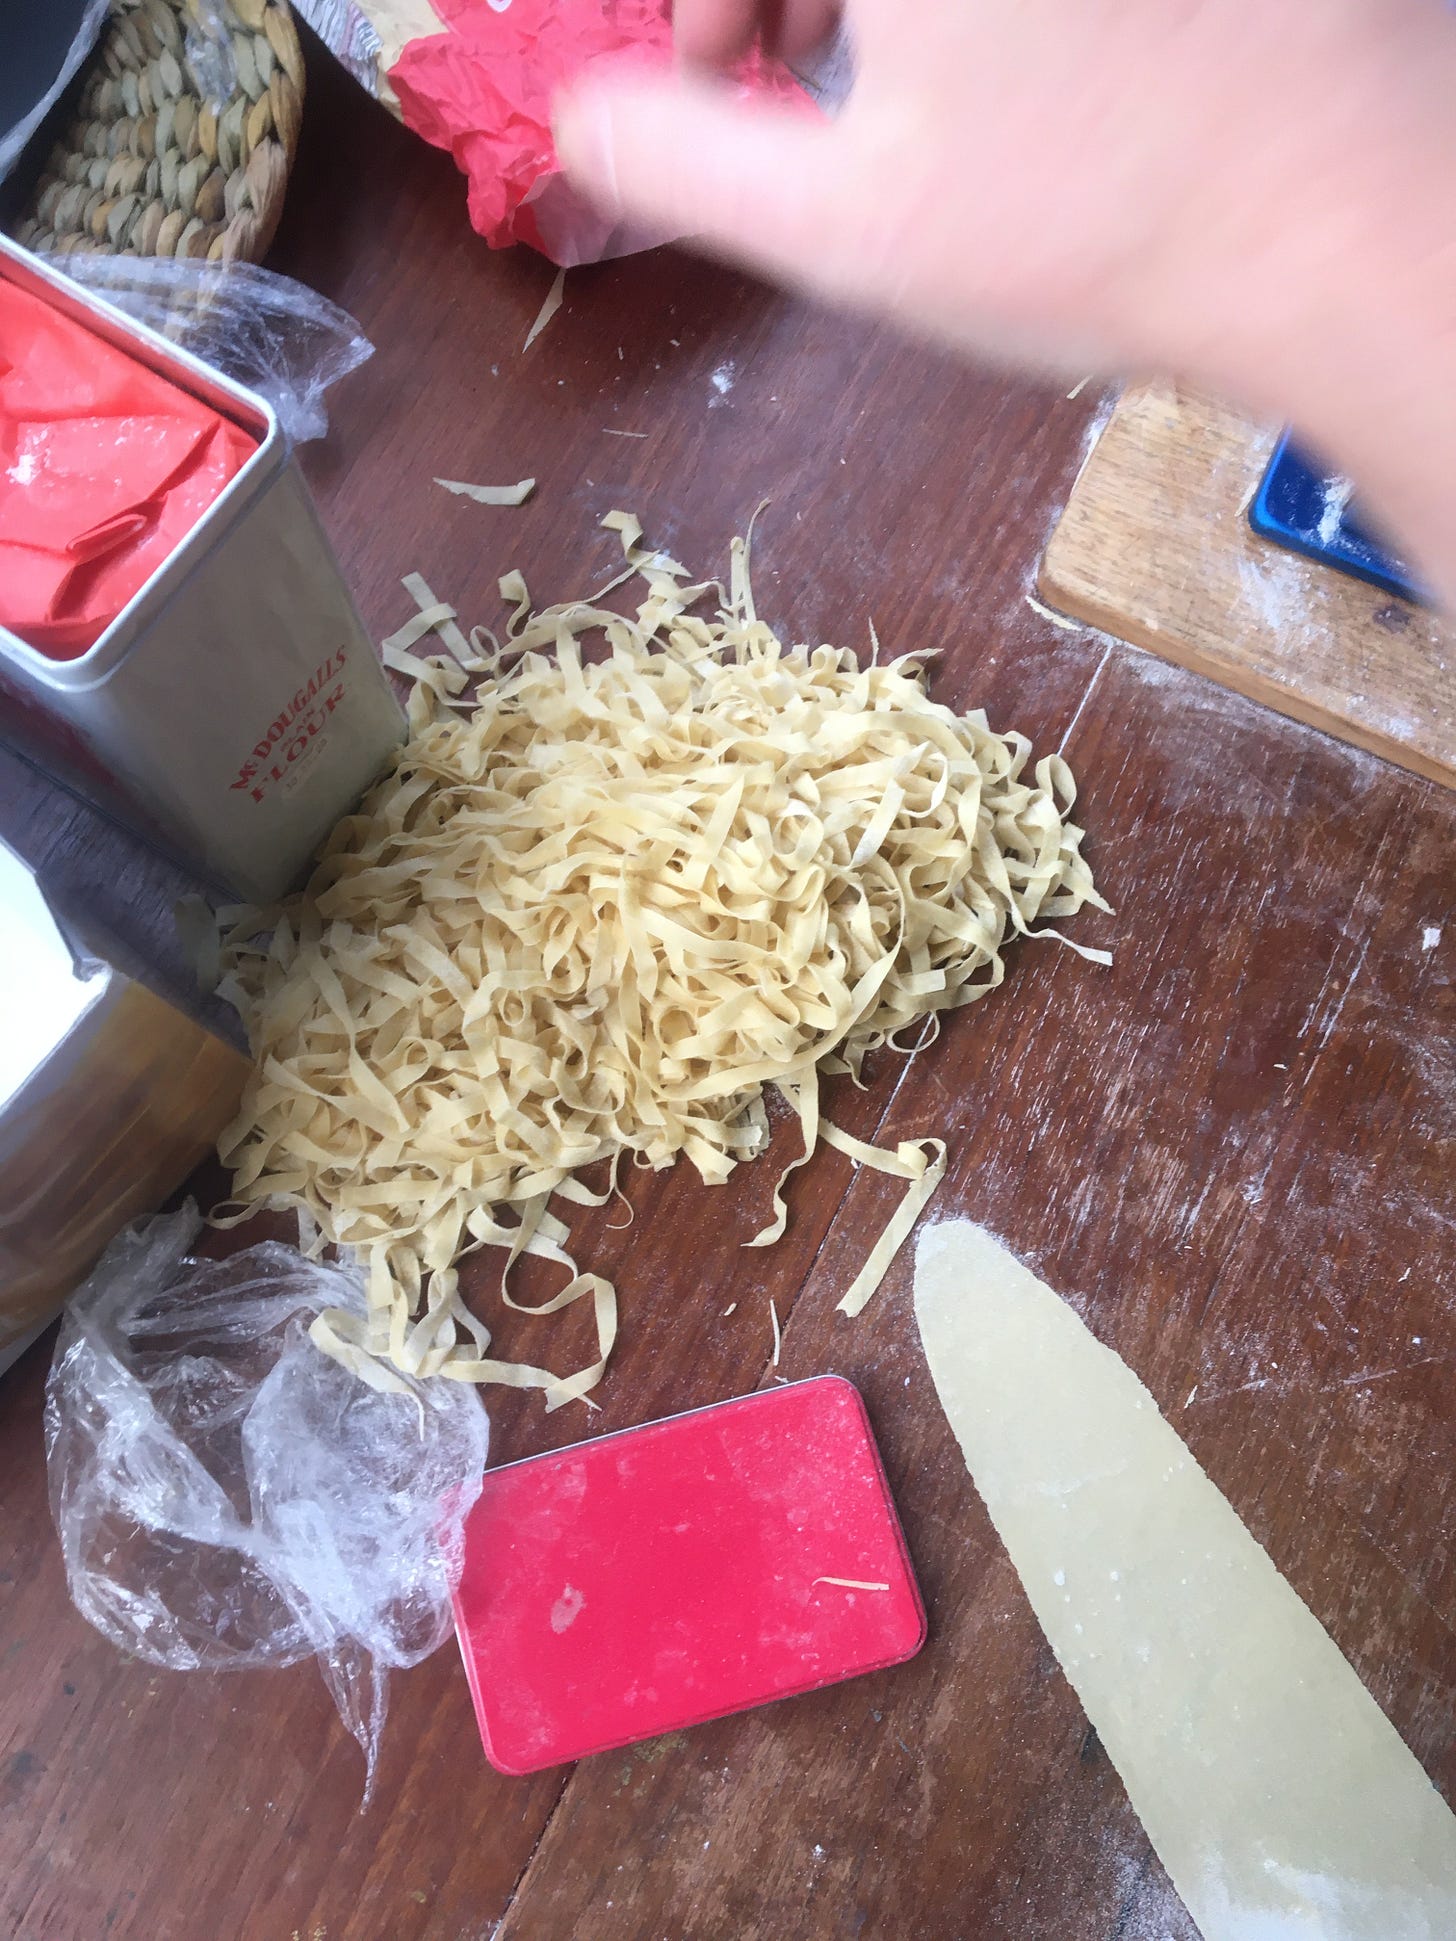 The same wooden table, with a pile of spangled pasta in ribbons. A smooth tongue shape of uncut pasta is to the bottom right, flat against the table. A tin of flour is to the left, its red lid too, a clod of cling film and some rush table mats. Kate's hand is, blurry, above. 